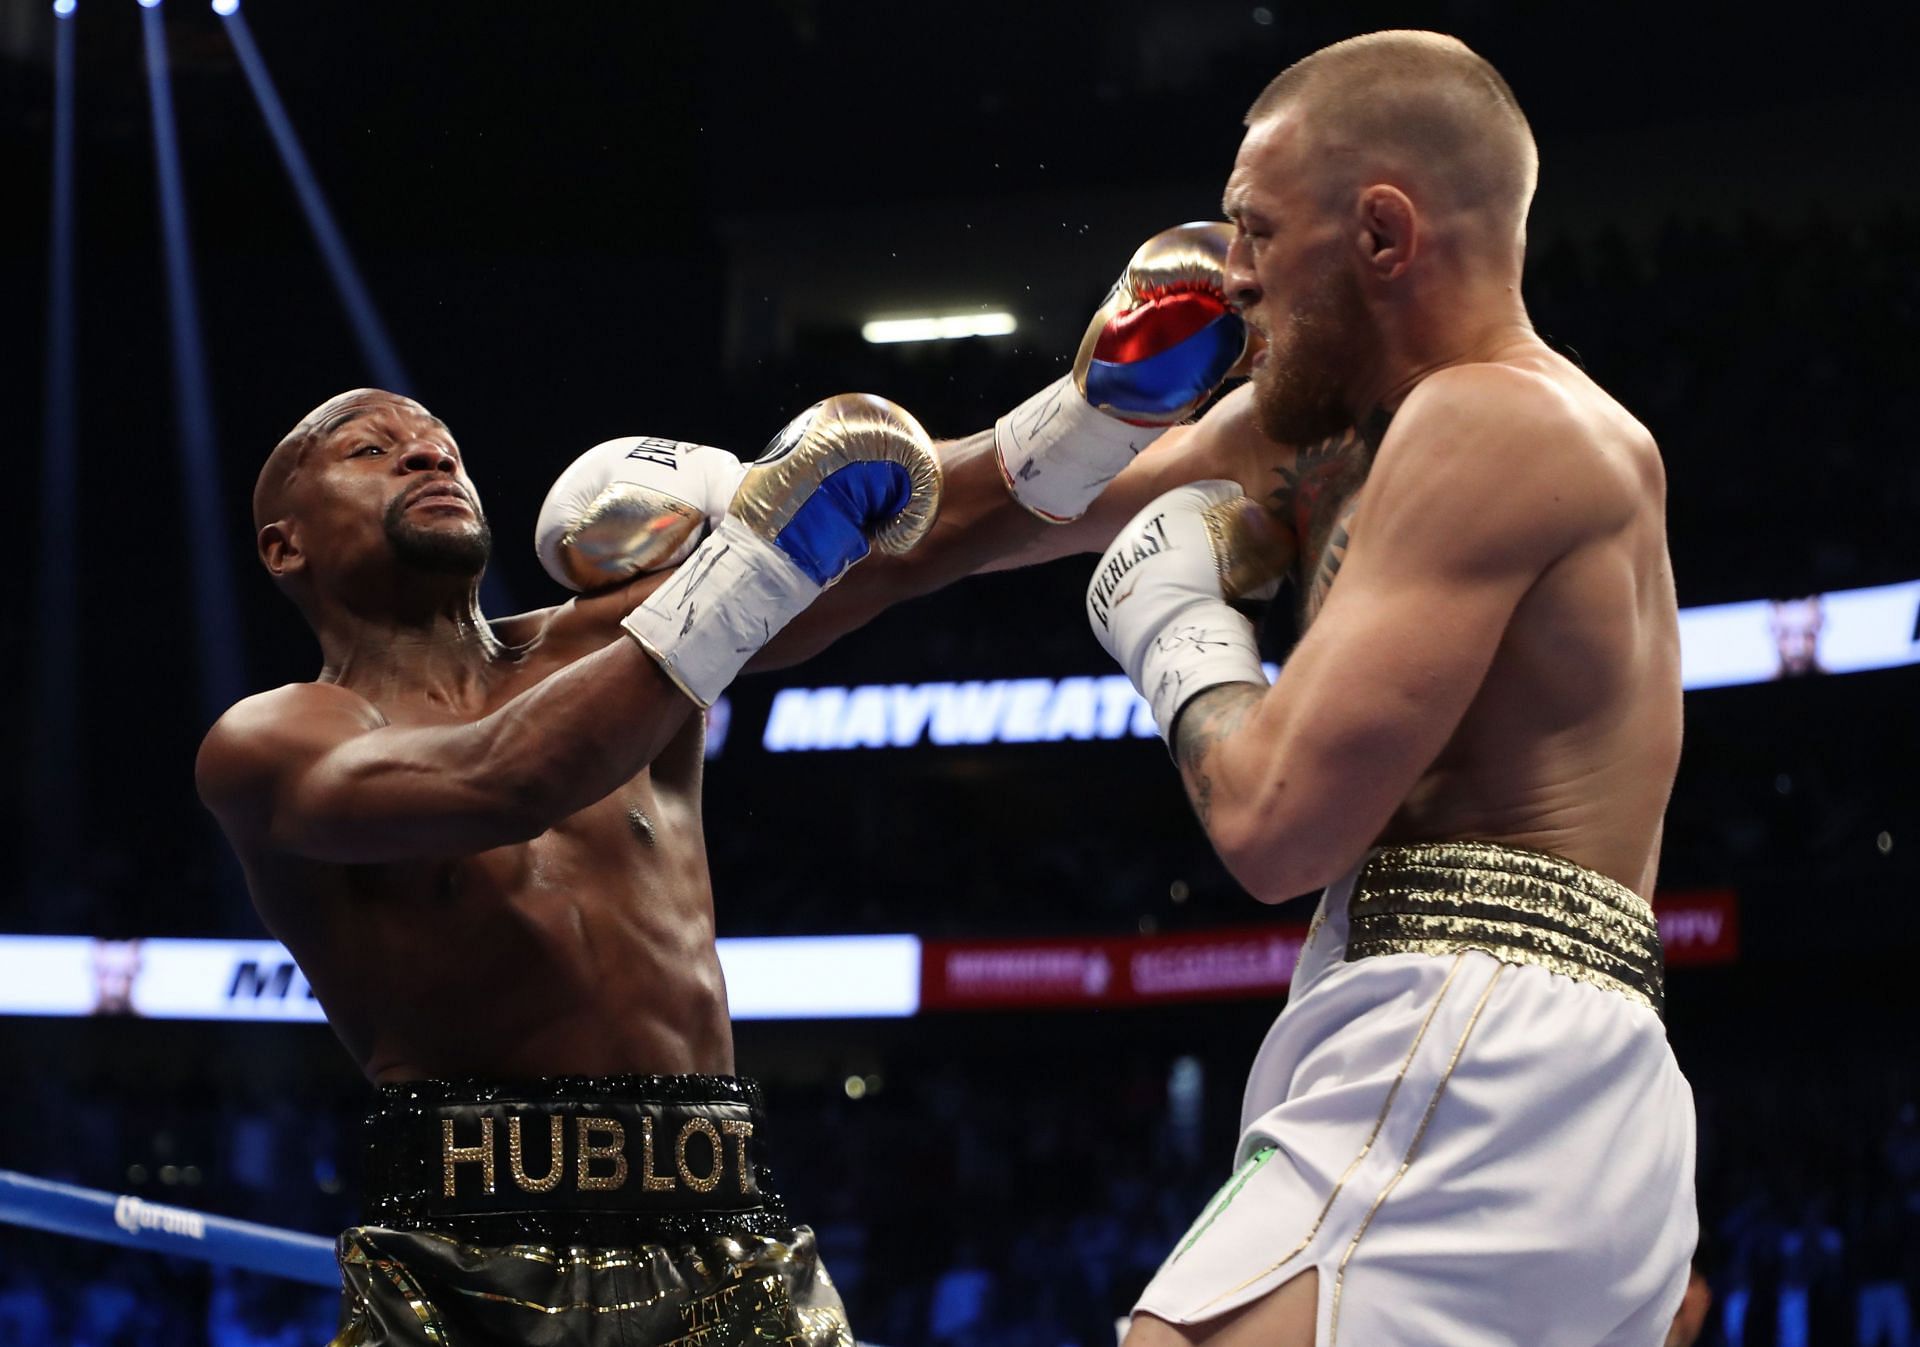 Floyd Mayweather Jr. (left) vs. Conor McGregor (right) - Via Getty Images